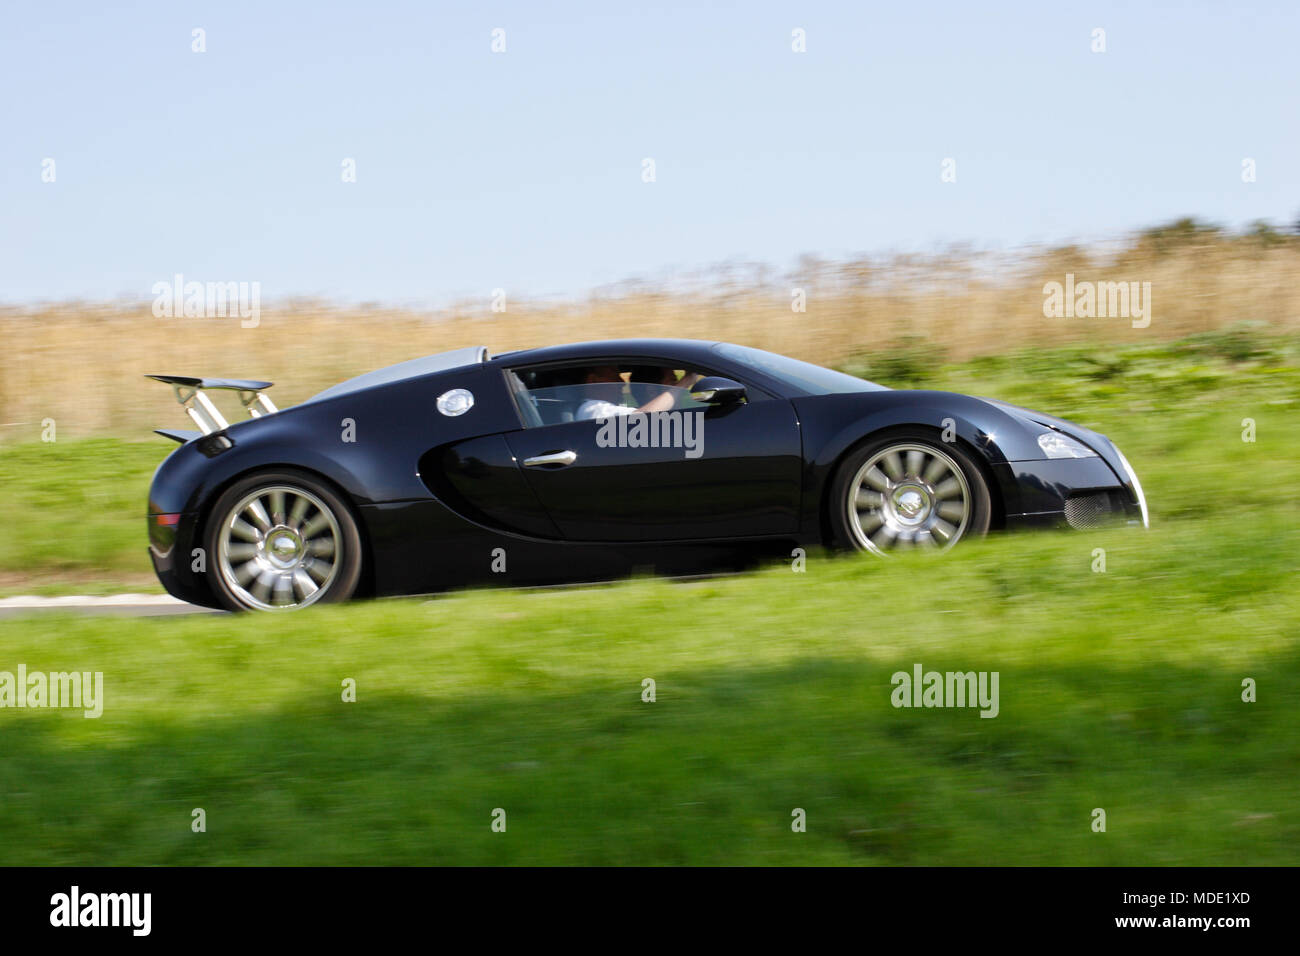 Low angle profile (side view) of Black Bugatti Veyron million £ pound hyper car hypercar driving fast on a country road. Stock Photo